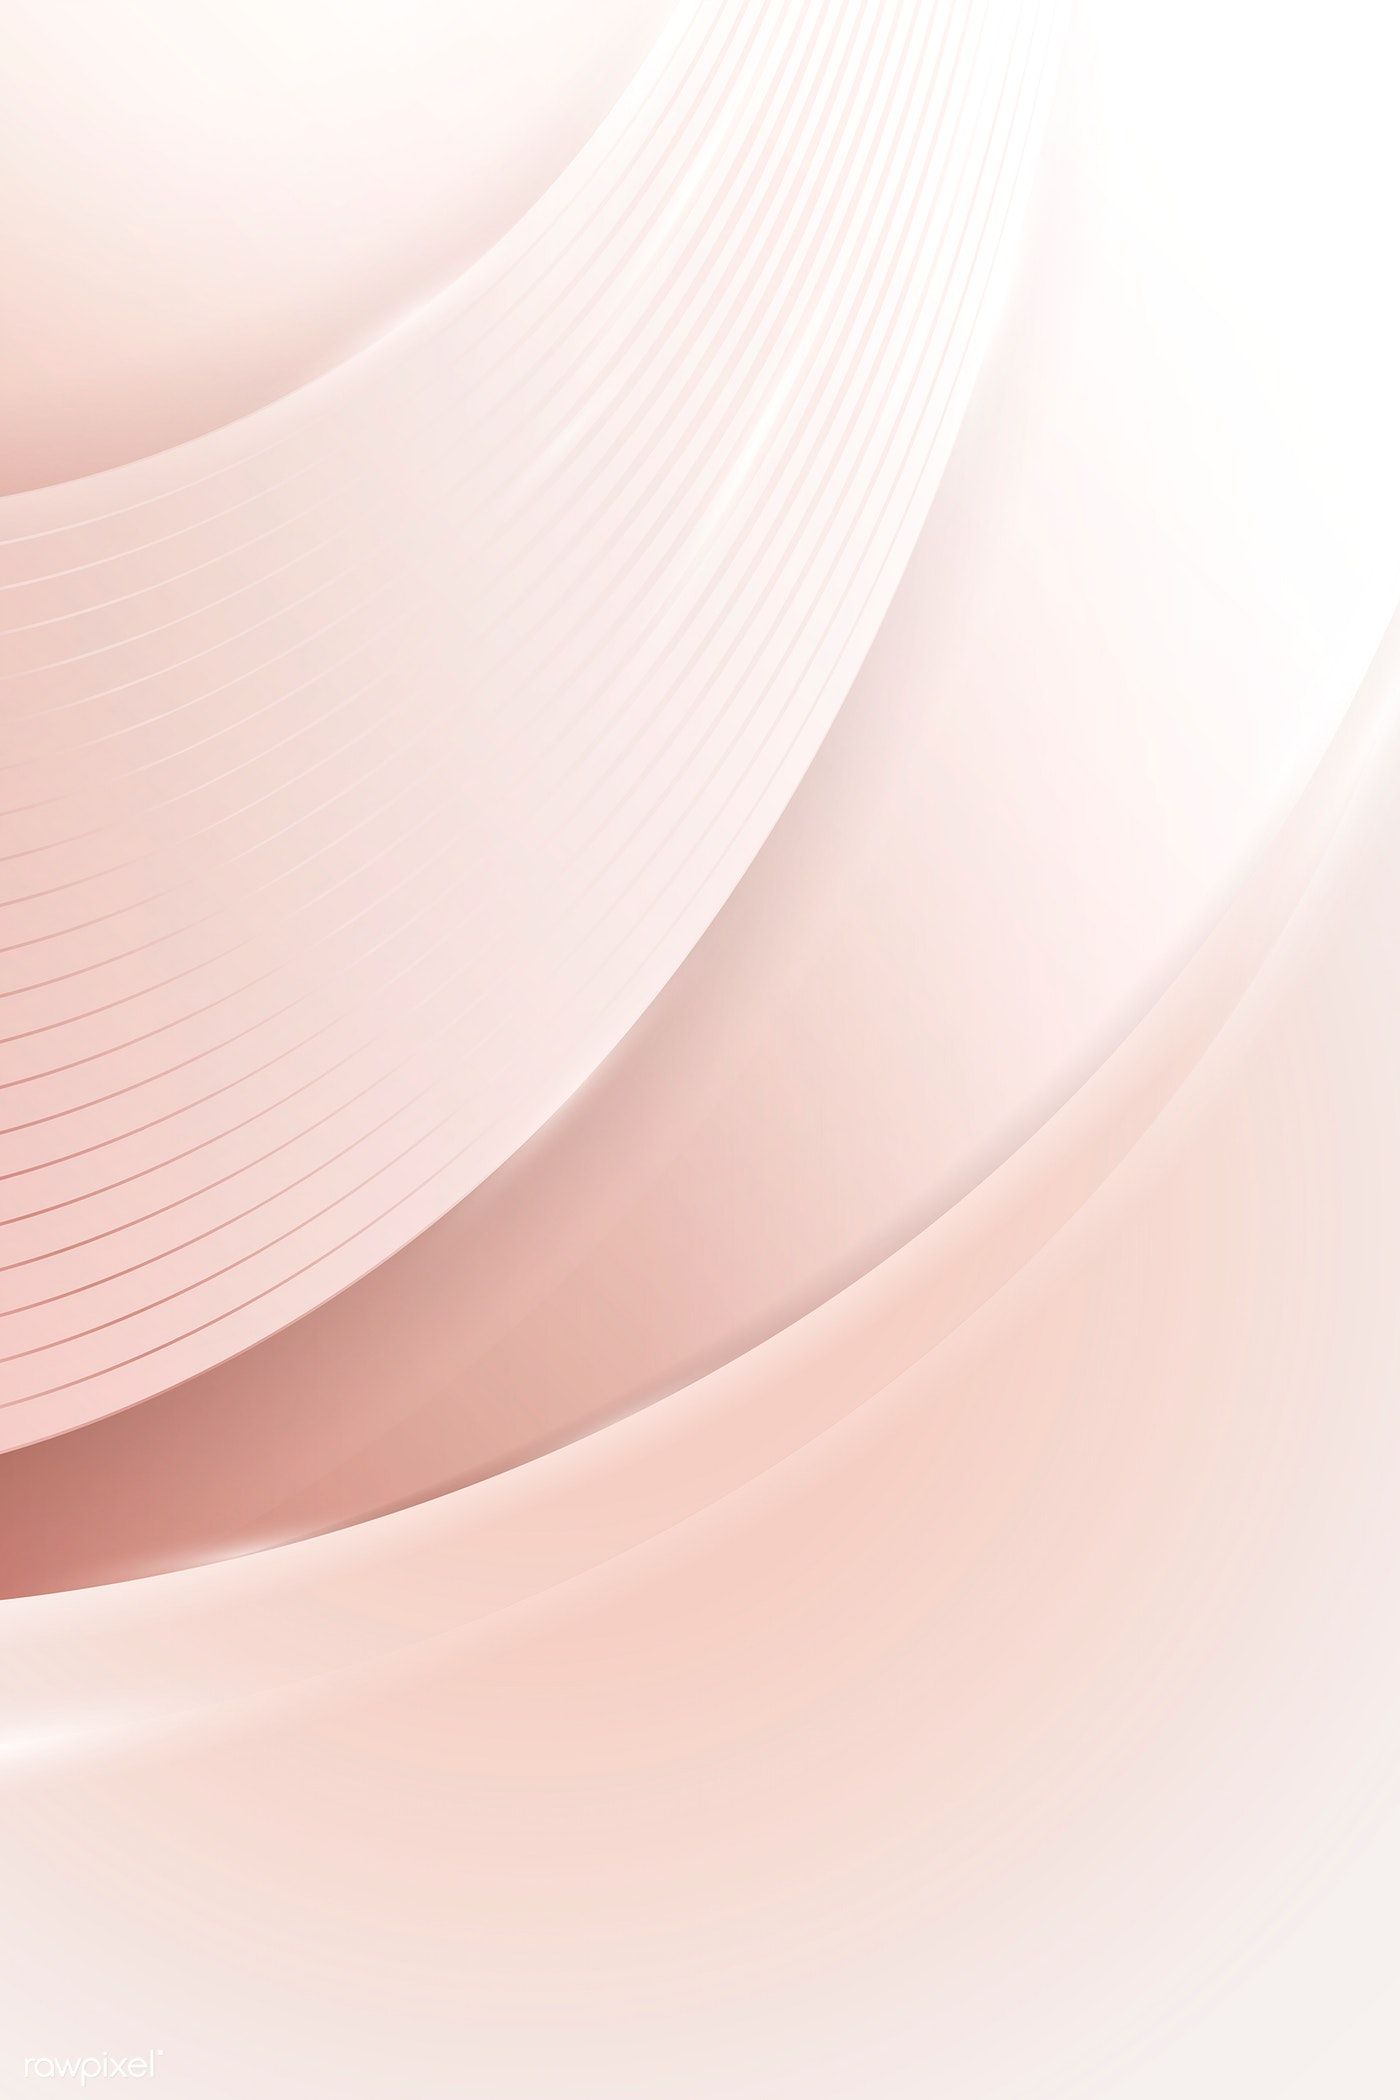 1400x2100 Soft pink abstract curved background vector | premium image by / Aew | Pink abstract, Soft pink, Pink background